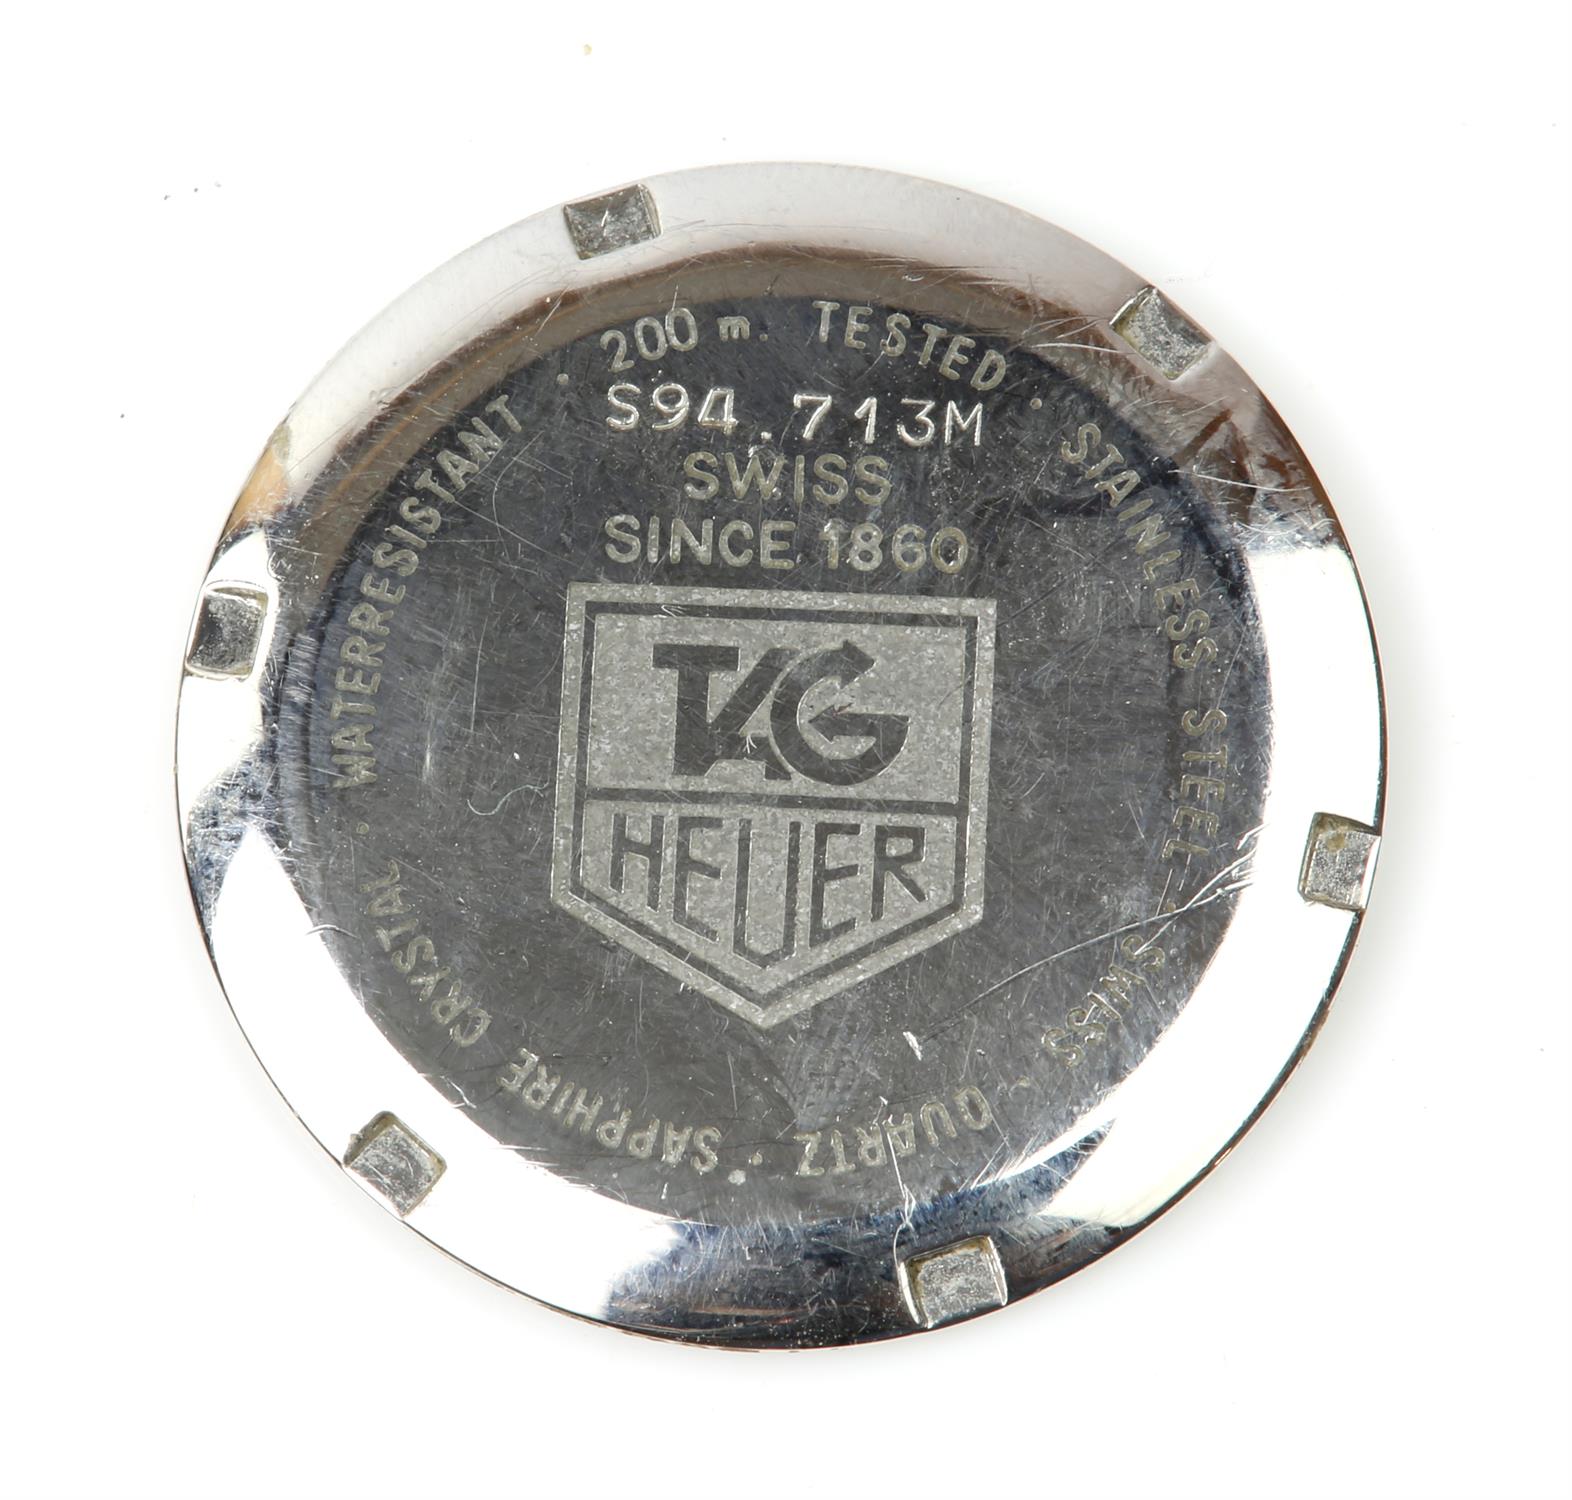 Tag Heuer, a SEL Calibre S94. 713M/E wristwatch, fitted with a unidirectional bezel, - Image 5 of 5